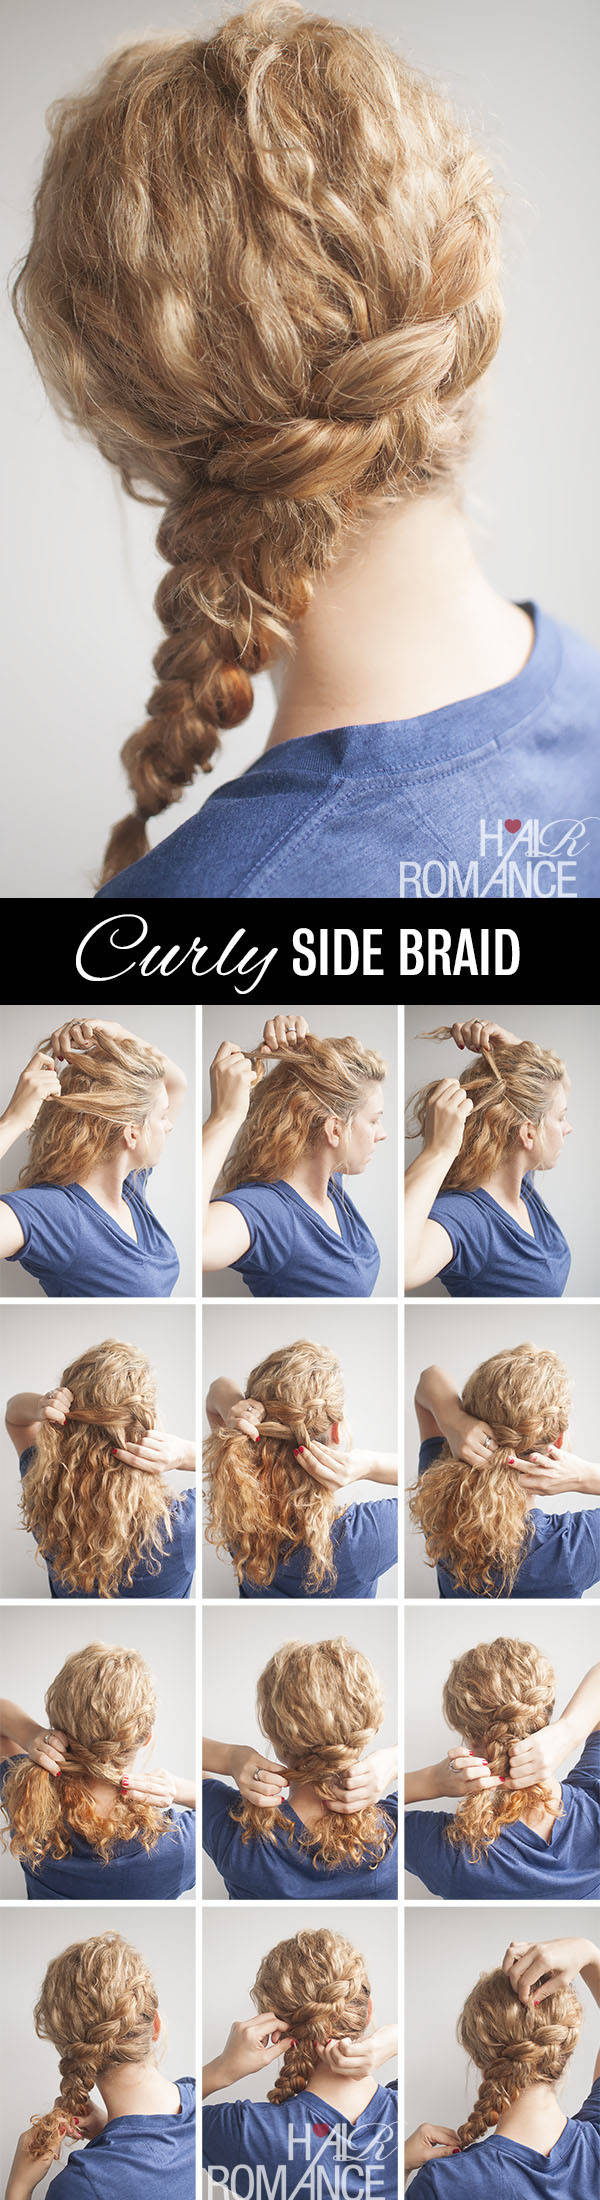 https://image.sistacafe.com/images/uploads/content_image/image/31256/1441031063-Hair-Romance-Curly-side-braid-hairstyle-tutorial.jpg